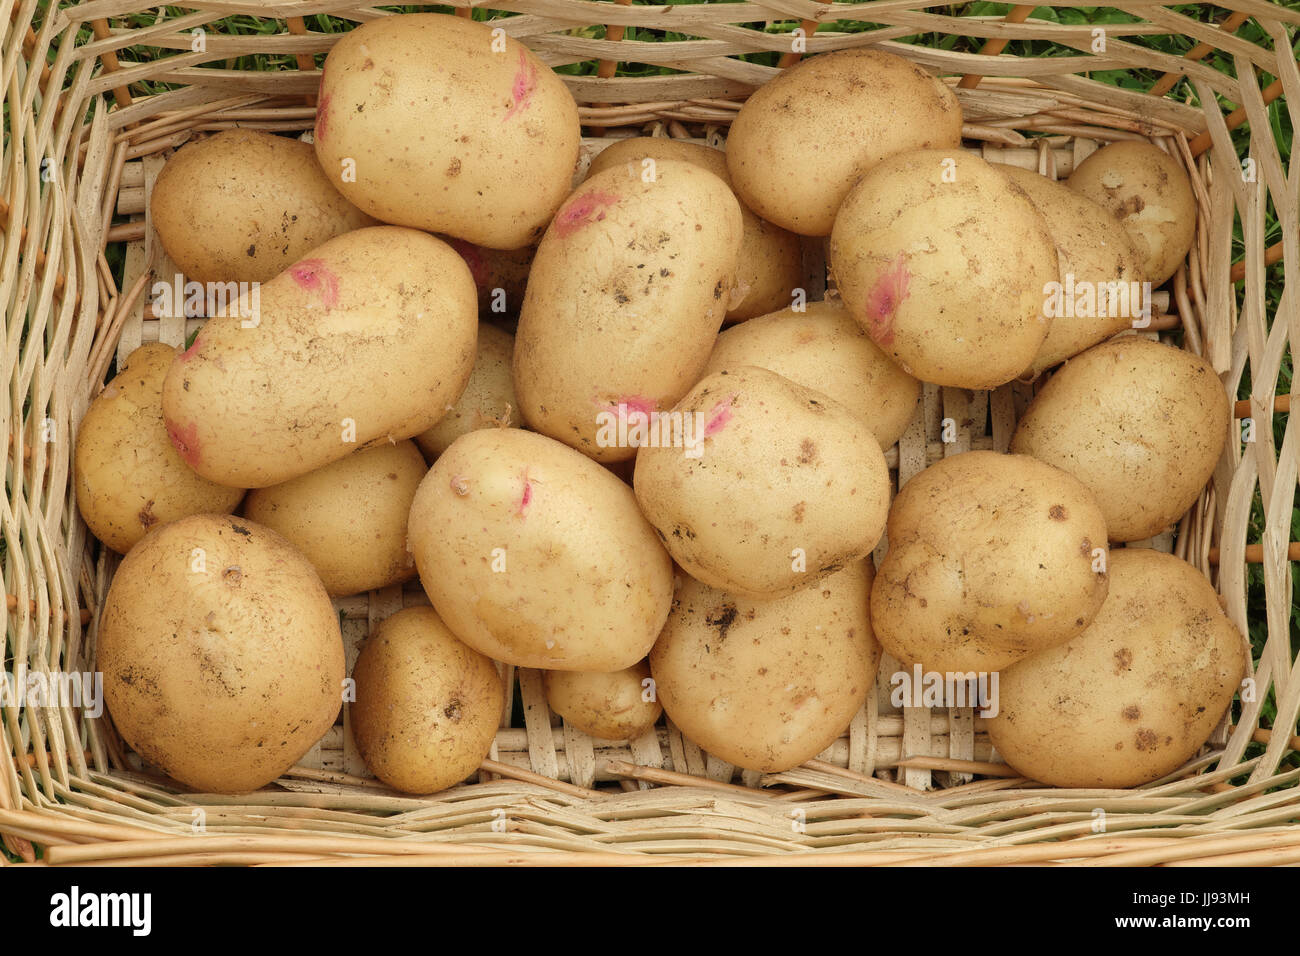 A crop of Vales Sovereign potatoes in a basket Stock Photo